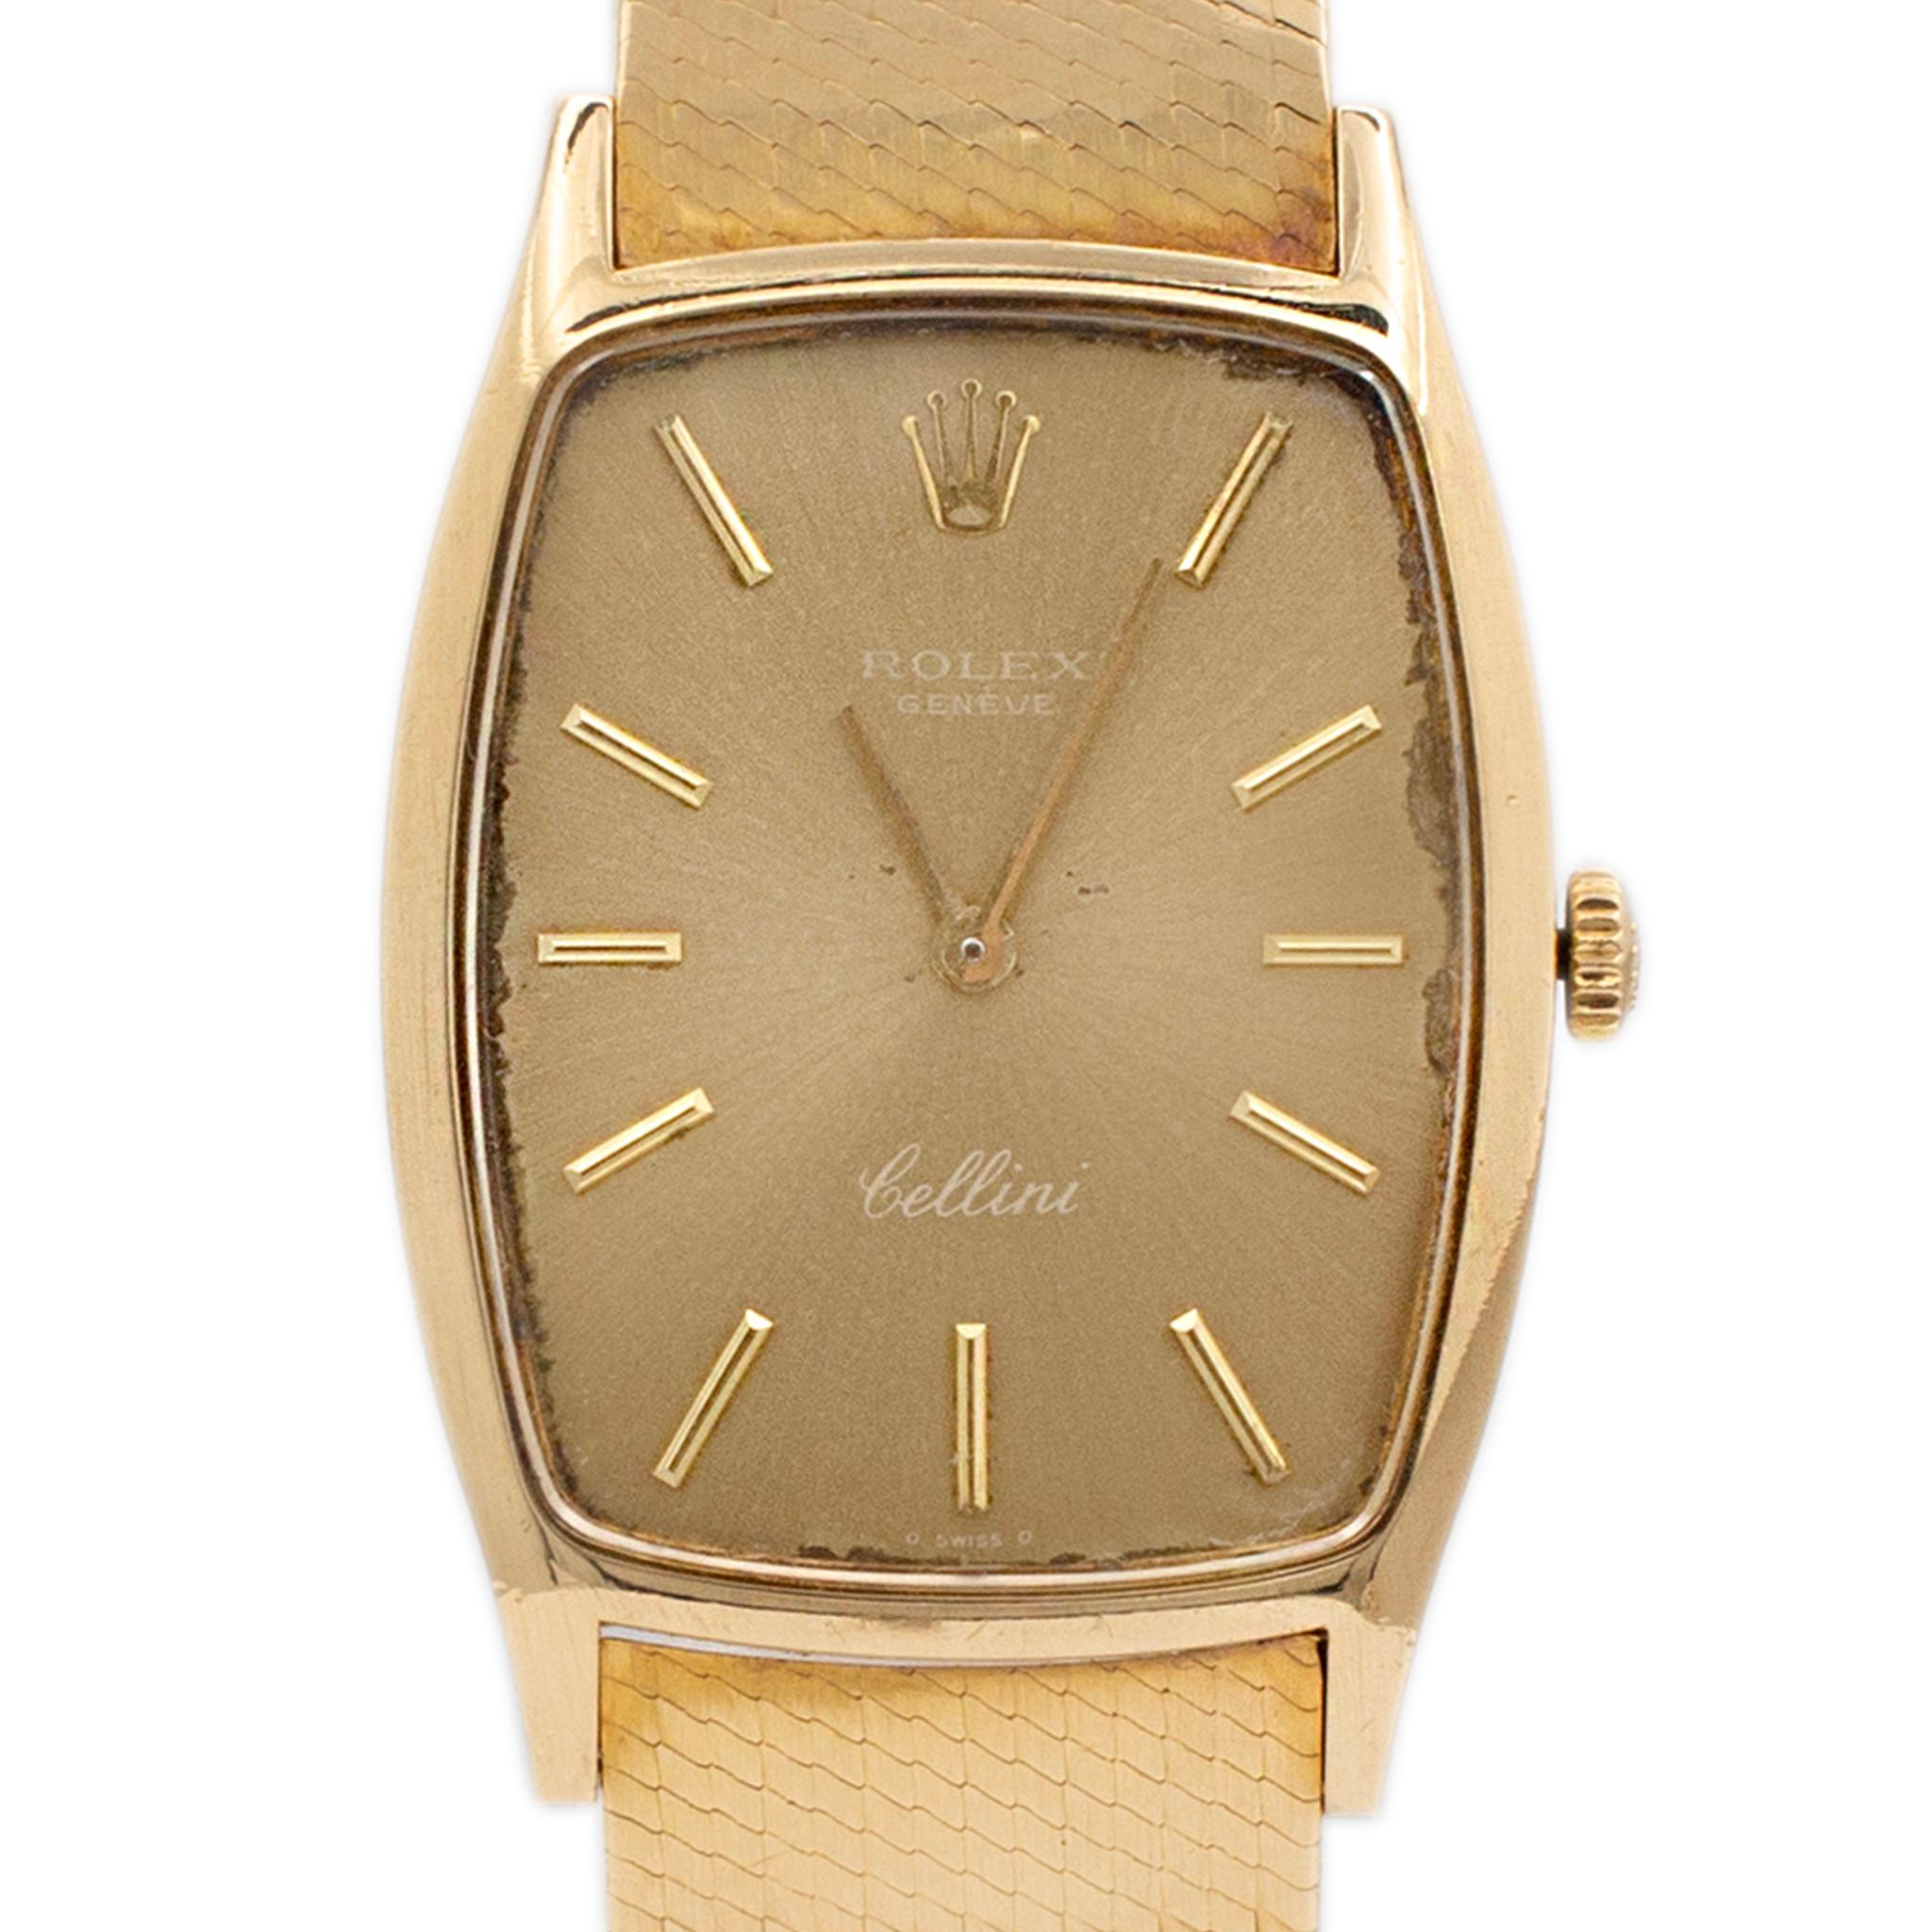 Brand: Rolex

Gender: Ladies

Metal Type: 18K Yellow Gold

Weight: 78.27 Grams

Ladies 18K yellow gold ROLEX Swiss made watch. The metal was tested and determined to be 18K yellow gold. Engraved with 